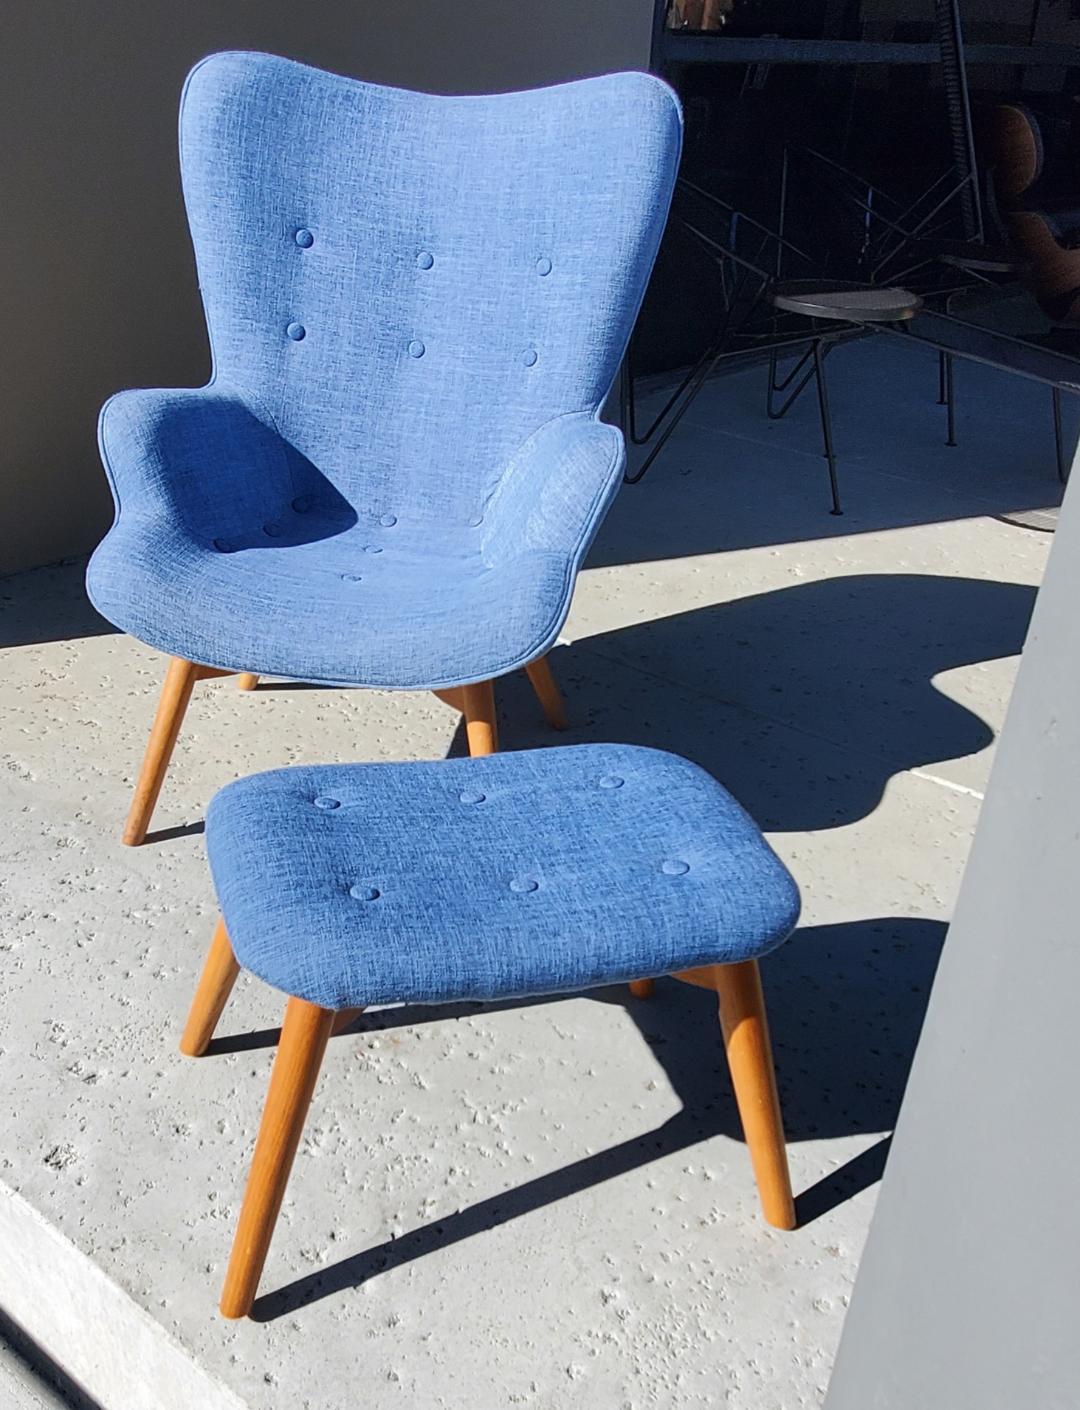 This Is A Wonderful Modern Upholstered Lounge Chair With Matching Footstool / Ottoman. 
This Classic Armchair Will Enhance Any Living Space, Work Space, Office Space, Solarium Or Sunroom. 
This Comfortable Lounge Chair with Matching Ottoman Speaks